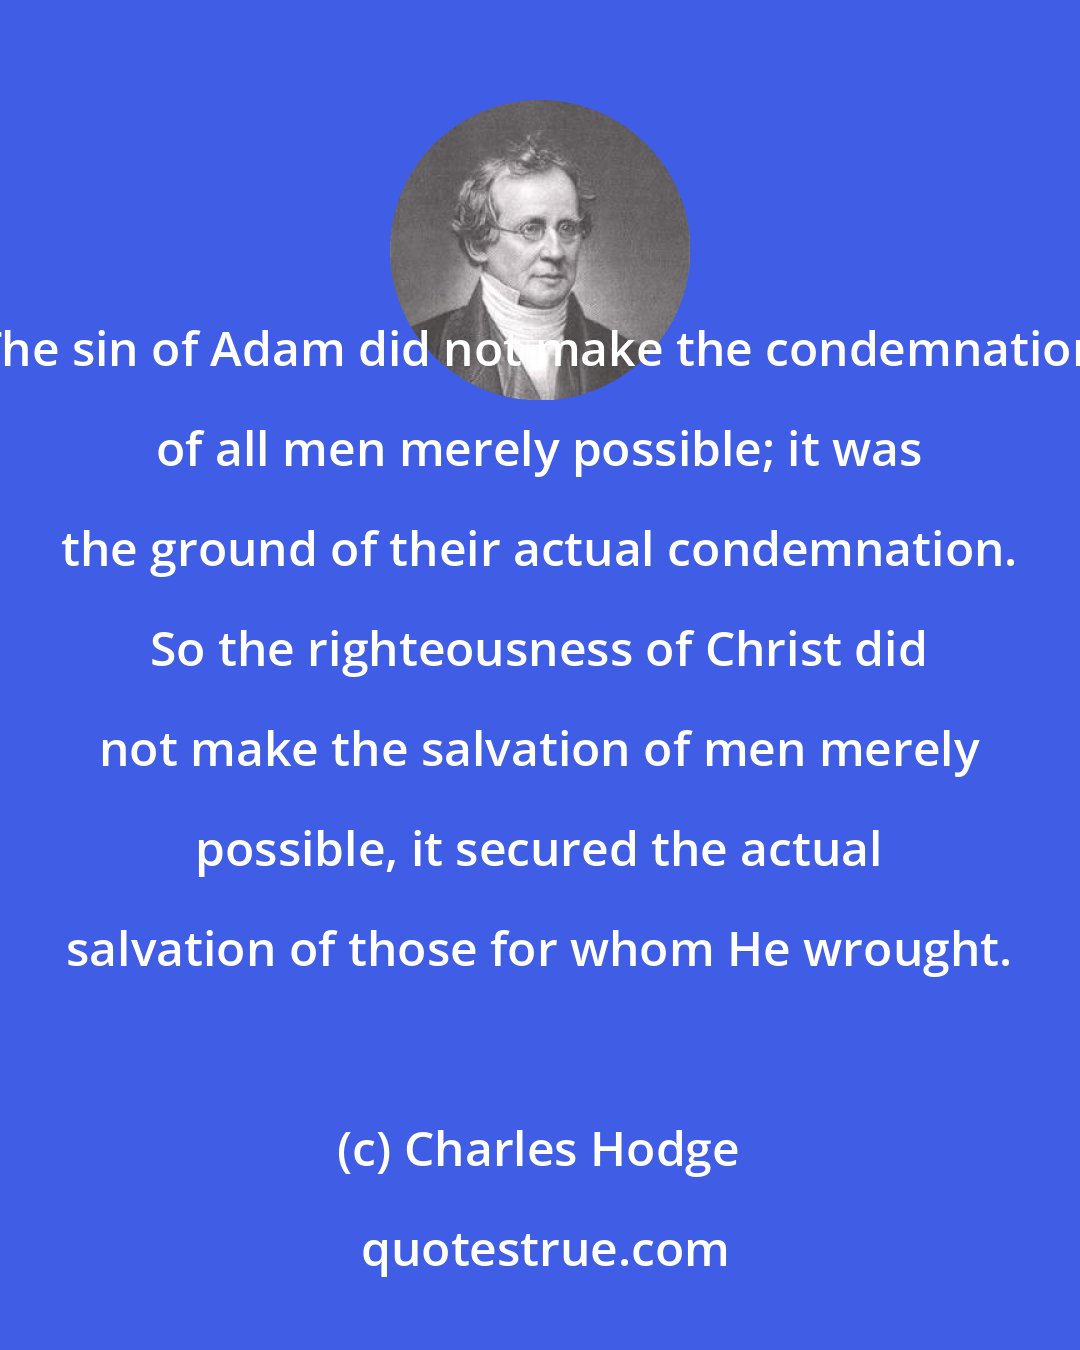 Charles Hodge: The sin of Adam did not make the condemnation of all men merely possible; it was the ground of their actual condemnation. So the righteousness of Christ did not make the salvation of men merely possible, it secured the actual salvation of those for whom He wrought.